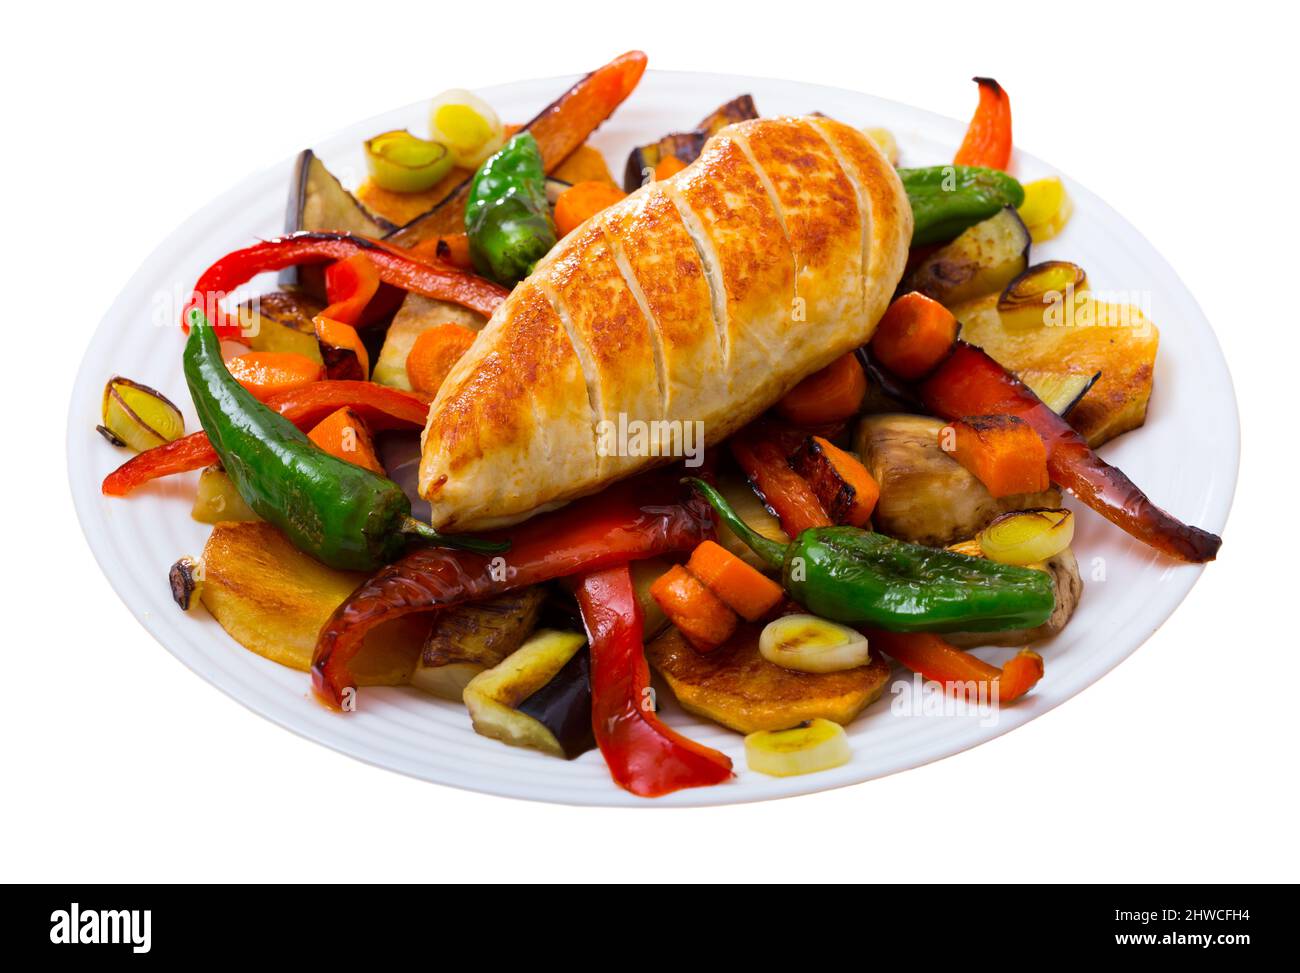 Top view of tasty baked different vegetables with chicken fillet at plate. Isolated over white background Stock Photo